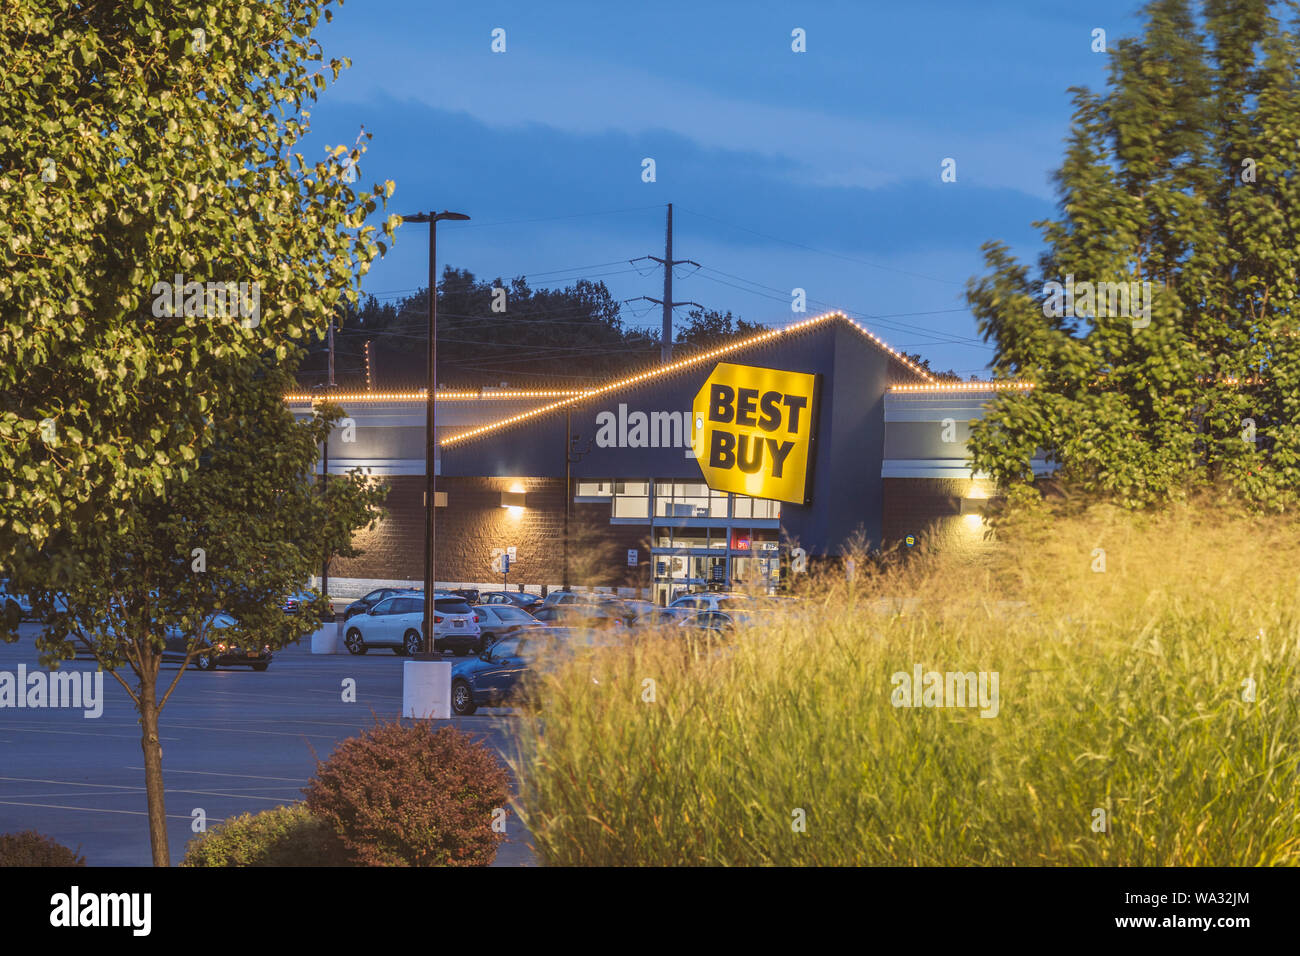 NEW HARTFORD, NEW YORK - AUG 16, 2019: Night view of Best Buy, is a major retail chain that sells all kinds of consumer electronics products. Stock Photo